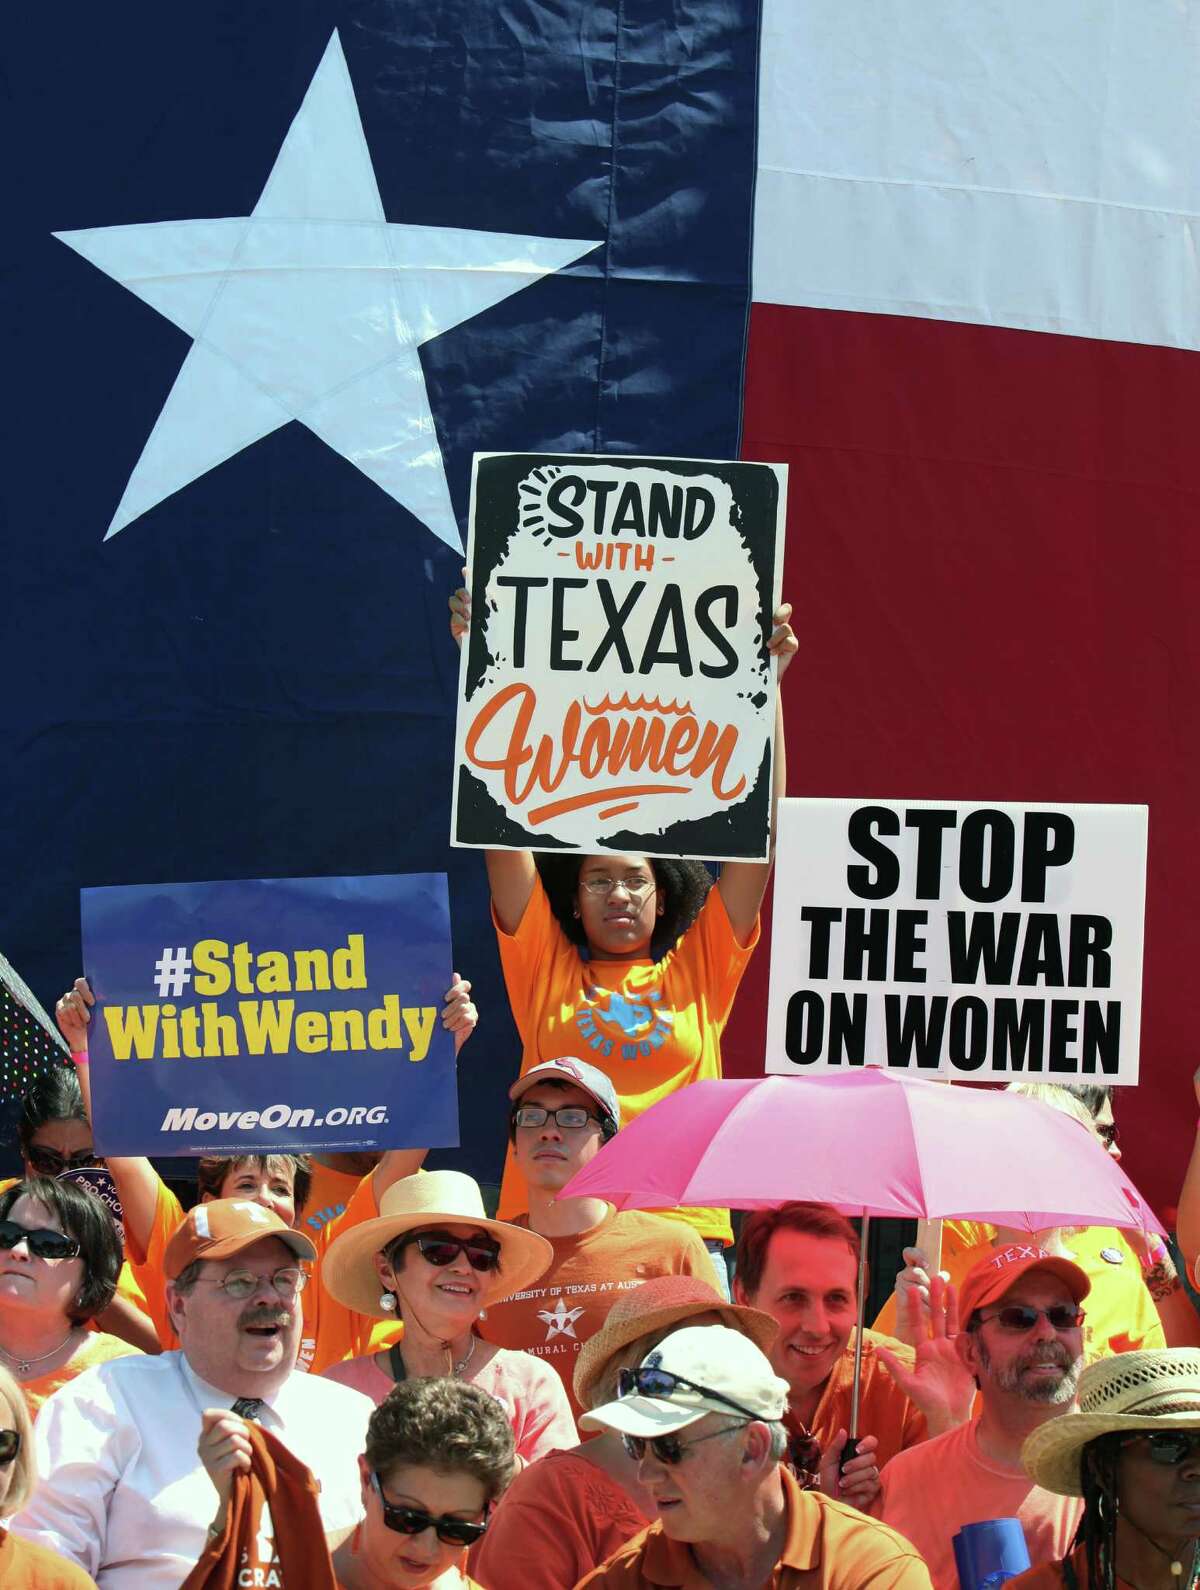 Pro-choice supporters in Austin.